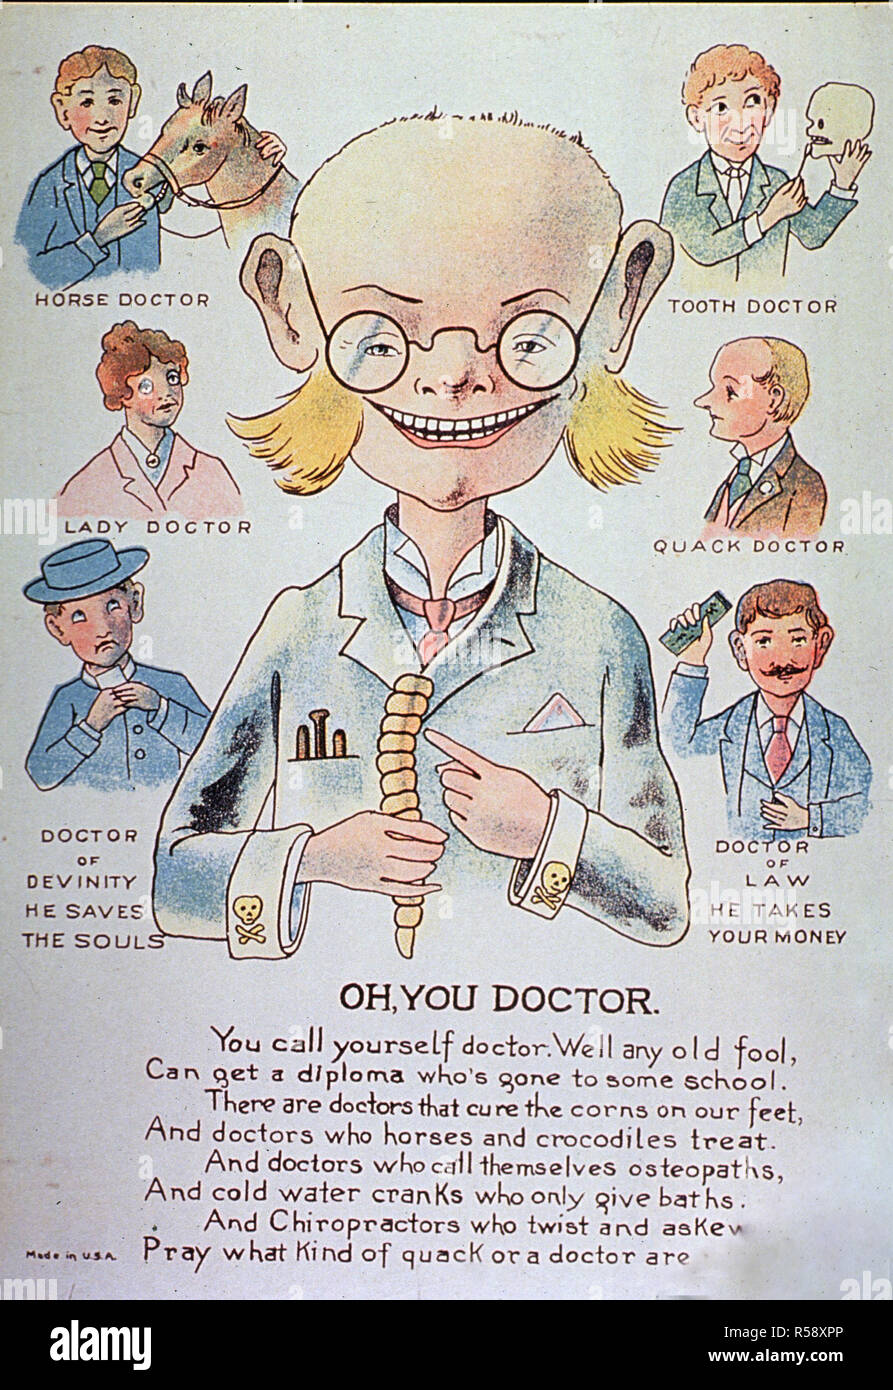 Half-length caricature of a doctor wearing glasses, holding a rattlesnake tail, and Death's Head on his cuffs, and surrounded by various types of doctors (i.e. dental, veterinary, quacks, women doctors, and law and divinity doctors) with a verse below. Stock Photo